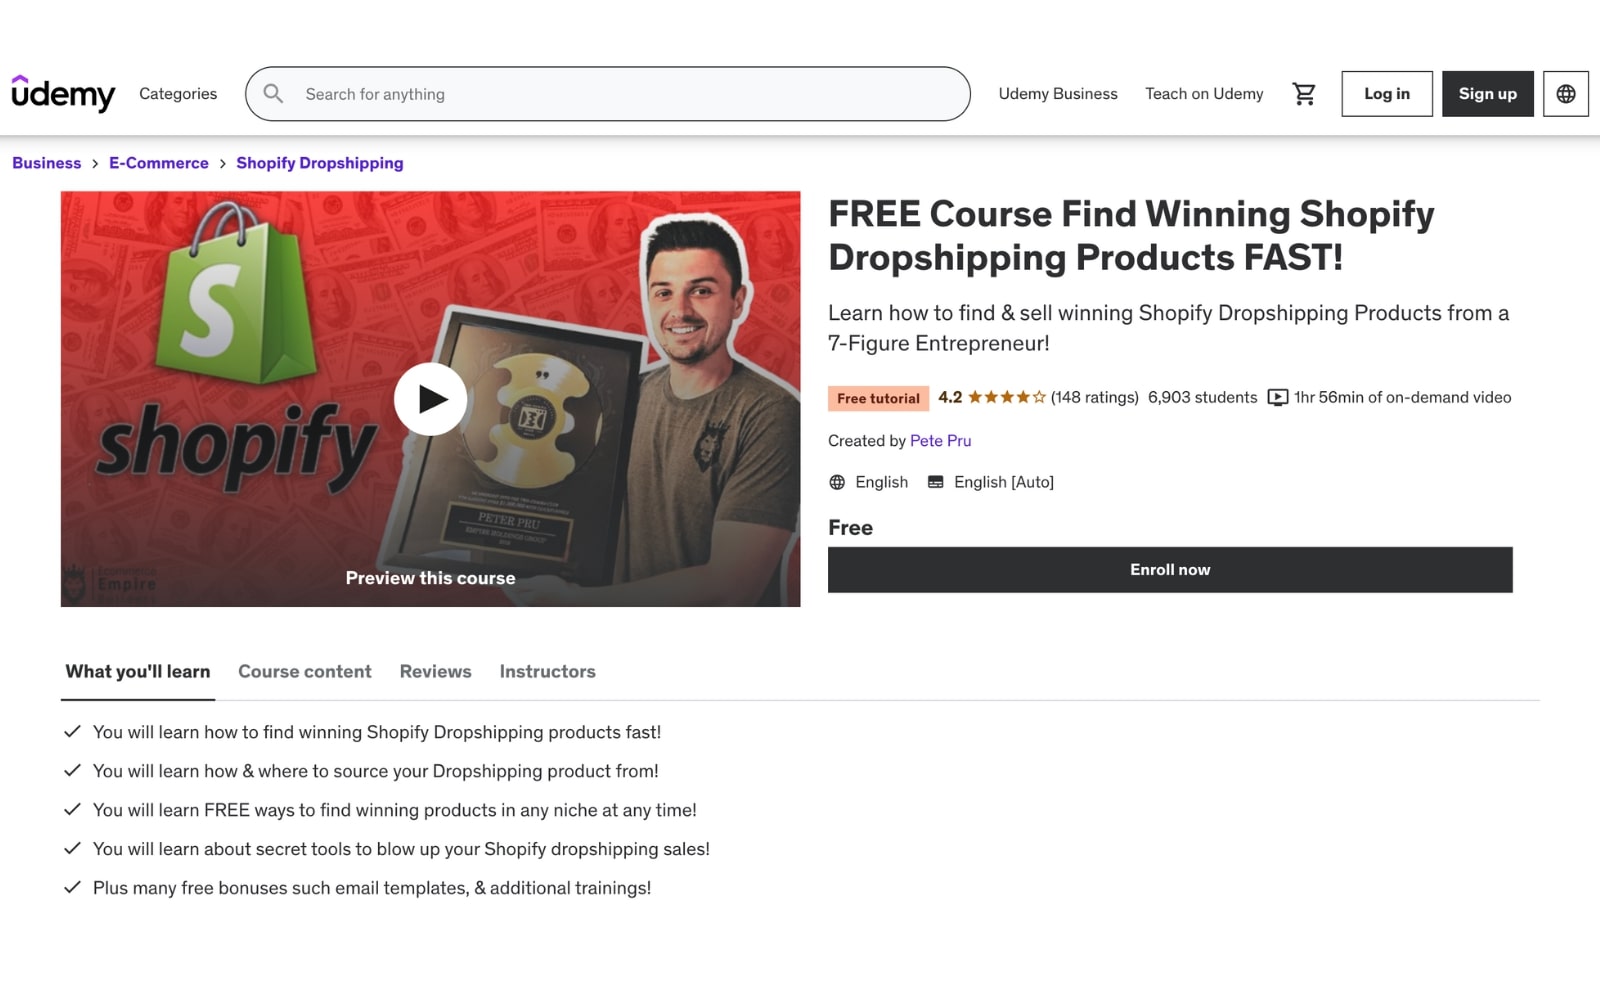 FREE Course Find Winning Shopify Dropshipping Products FAST!